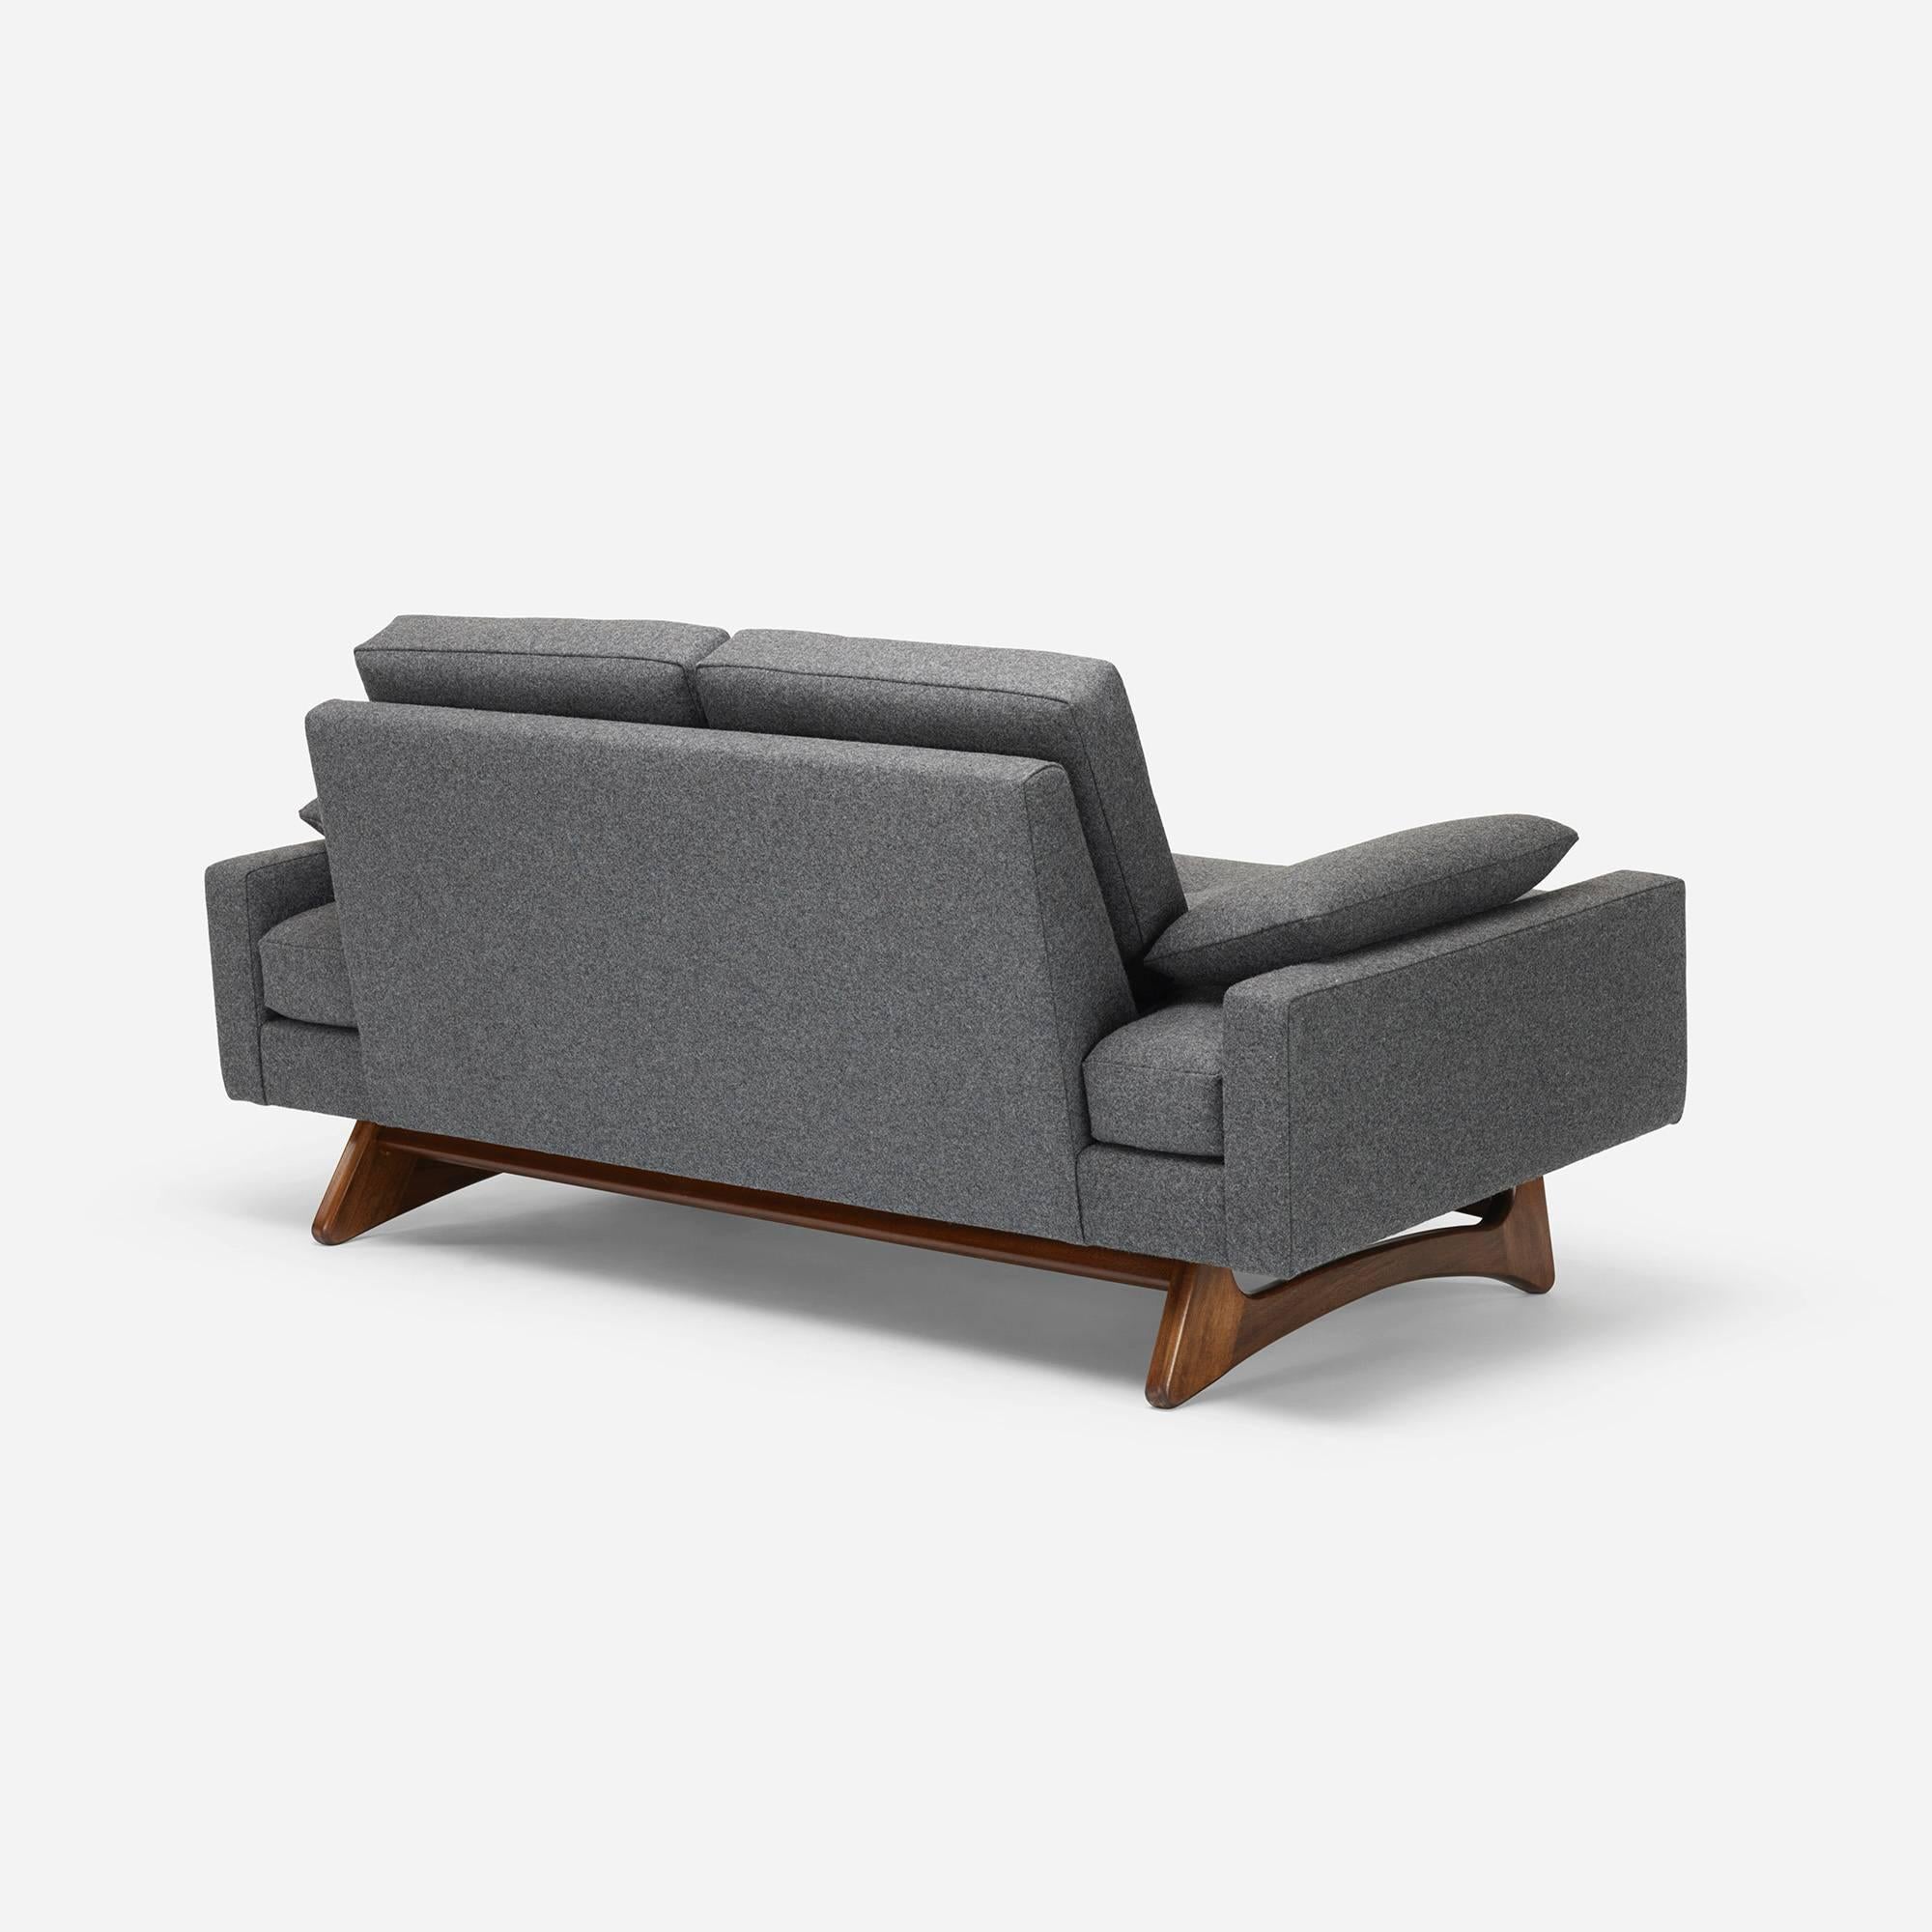 This settee is the smaller version of the well-known model 2408 sofa by Adrian Pearsall. The is the perfect apartment piece, still long enough for most to stretch out on and even serve as a guest bed in a pinch. With a dynamic solid walnut base and